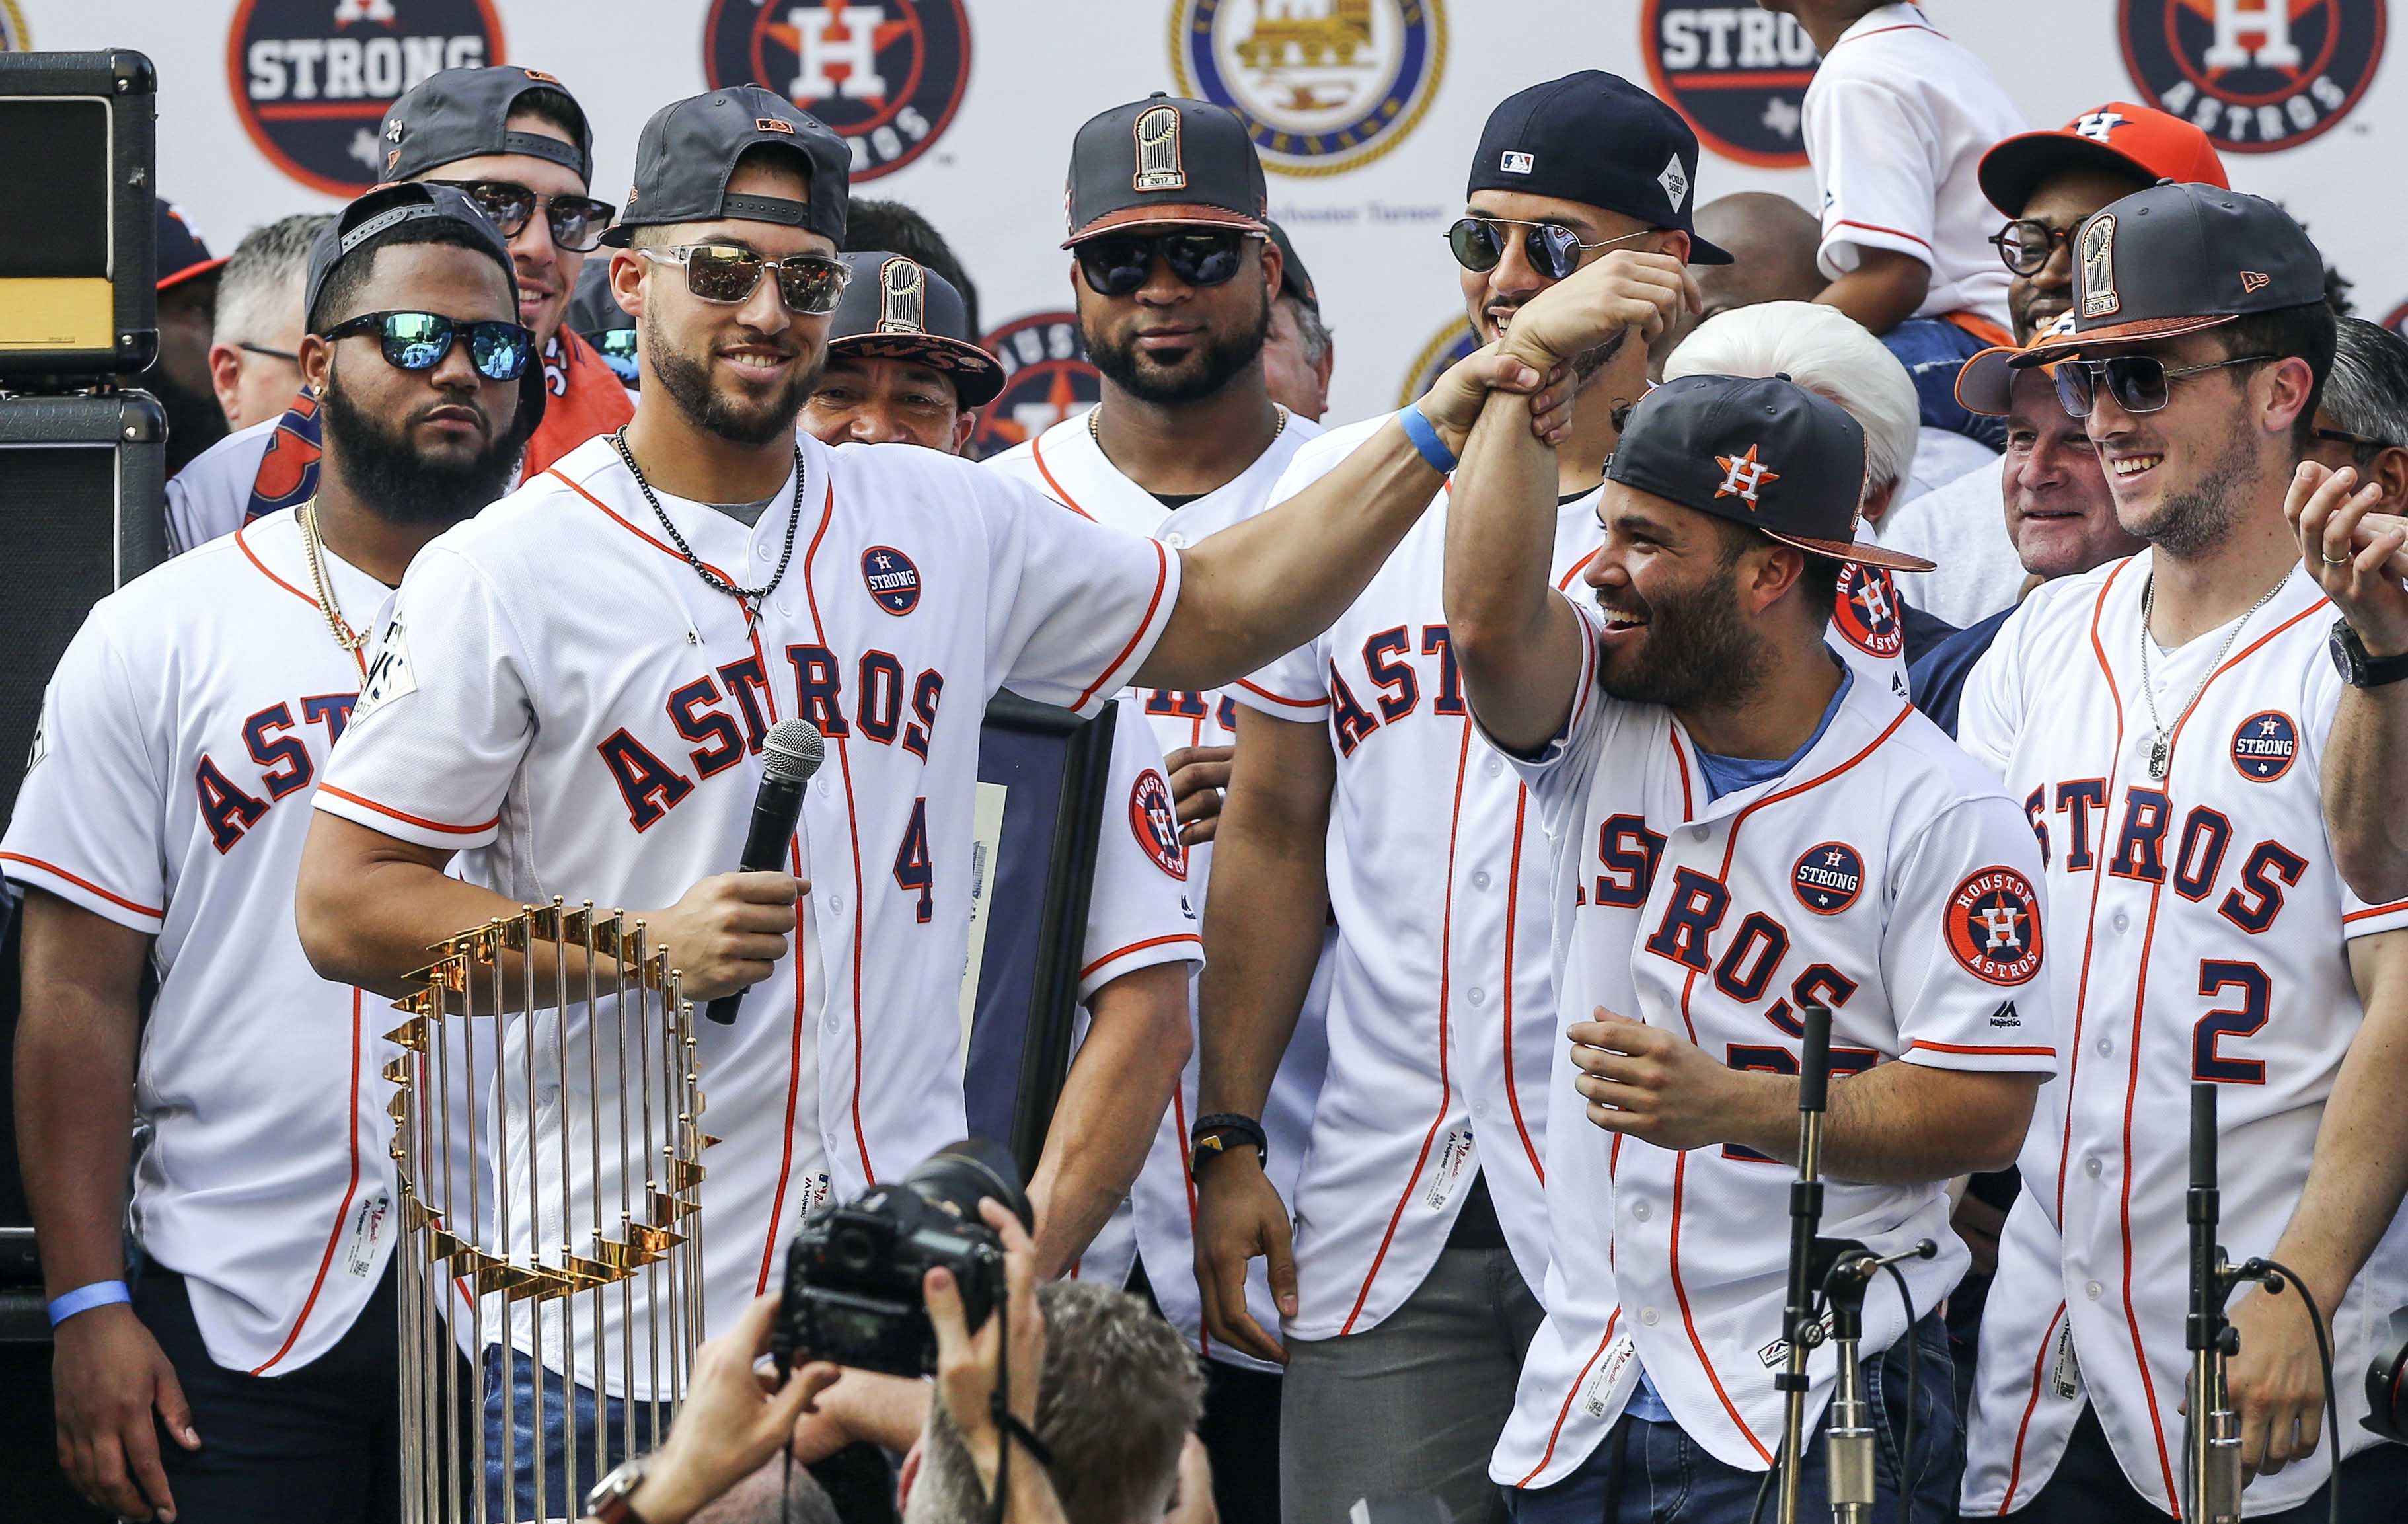 Who will challenge the Astros in 2018?